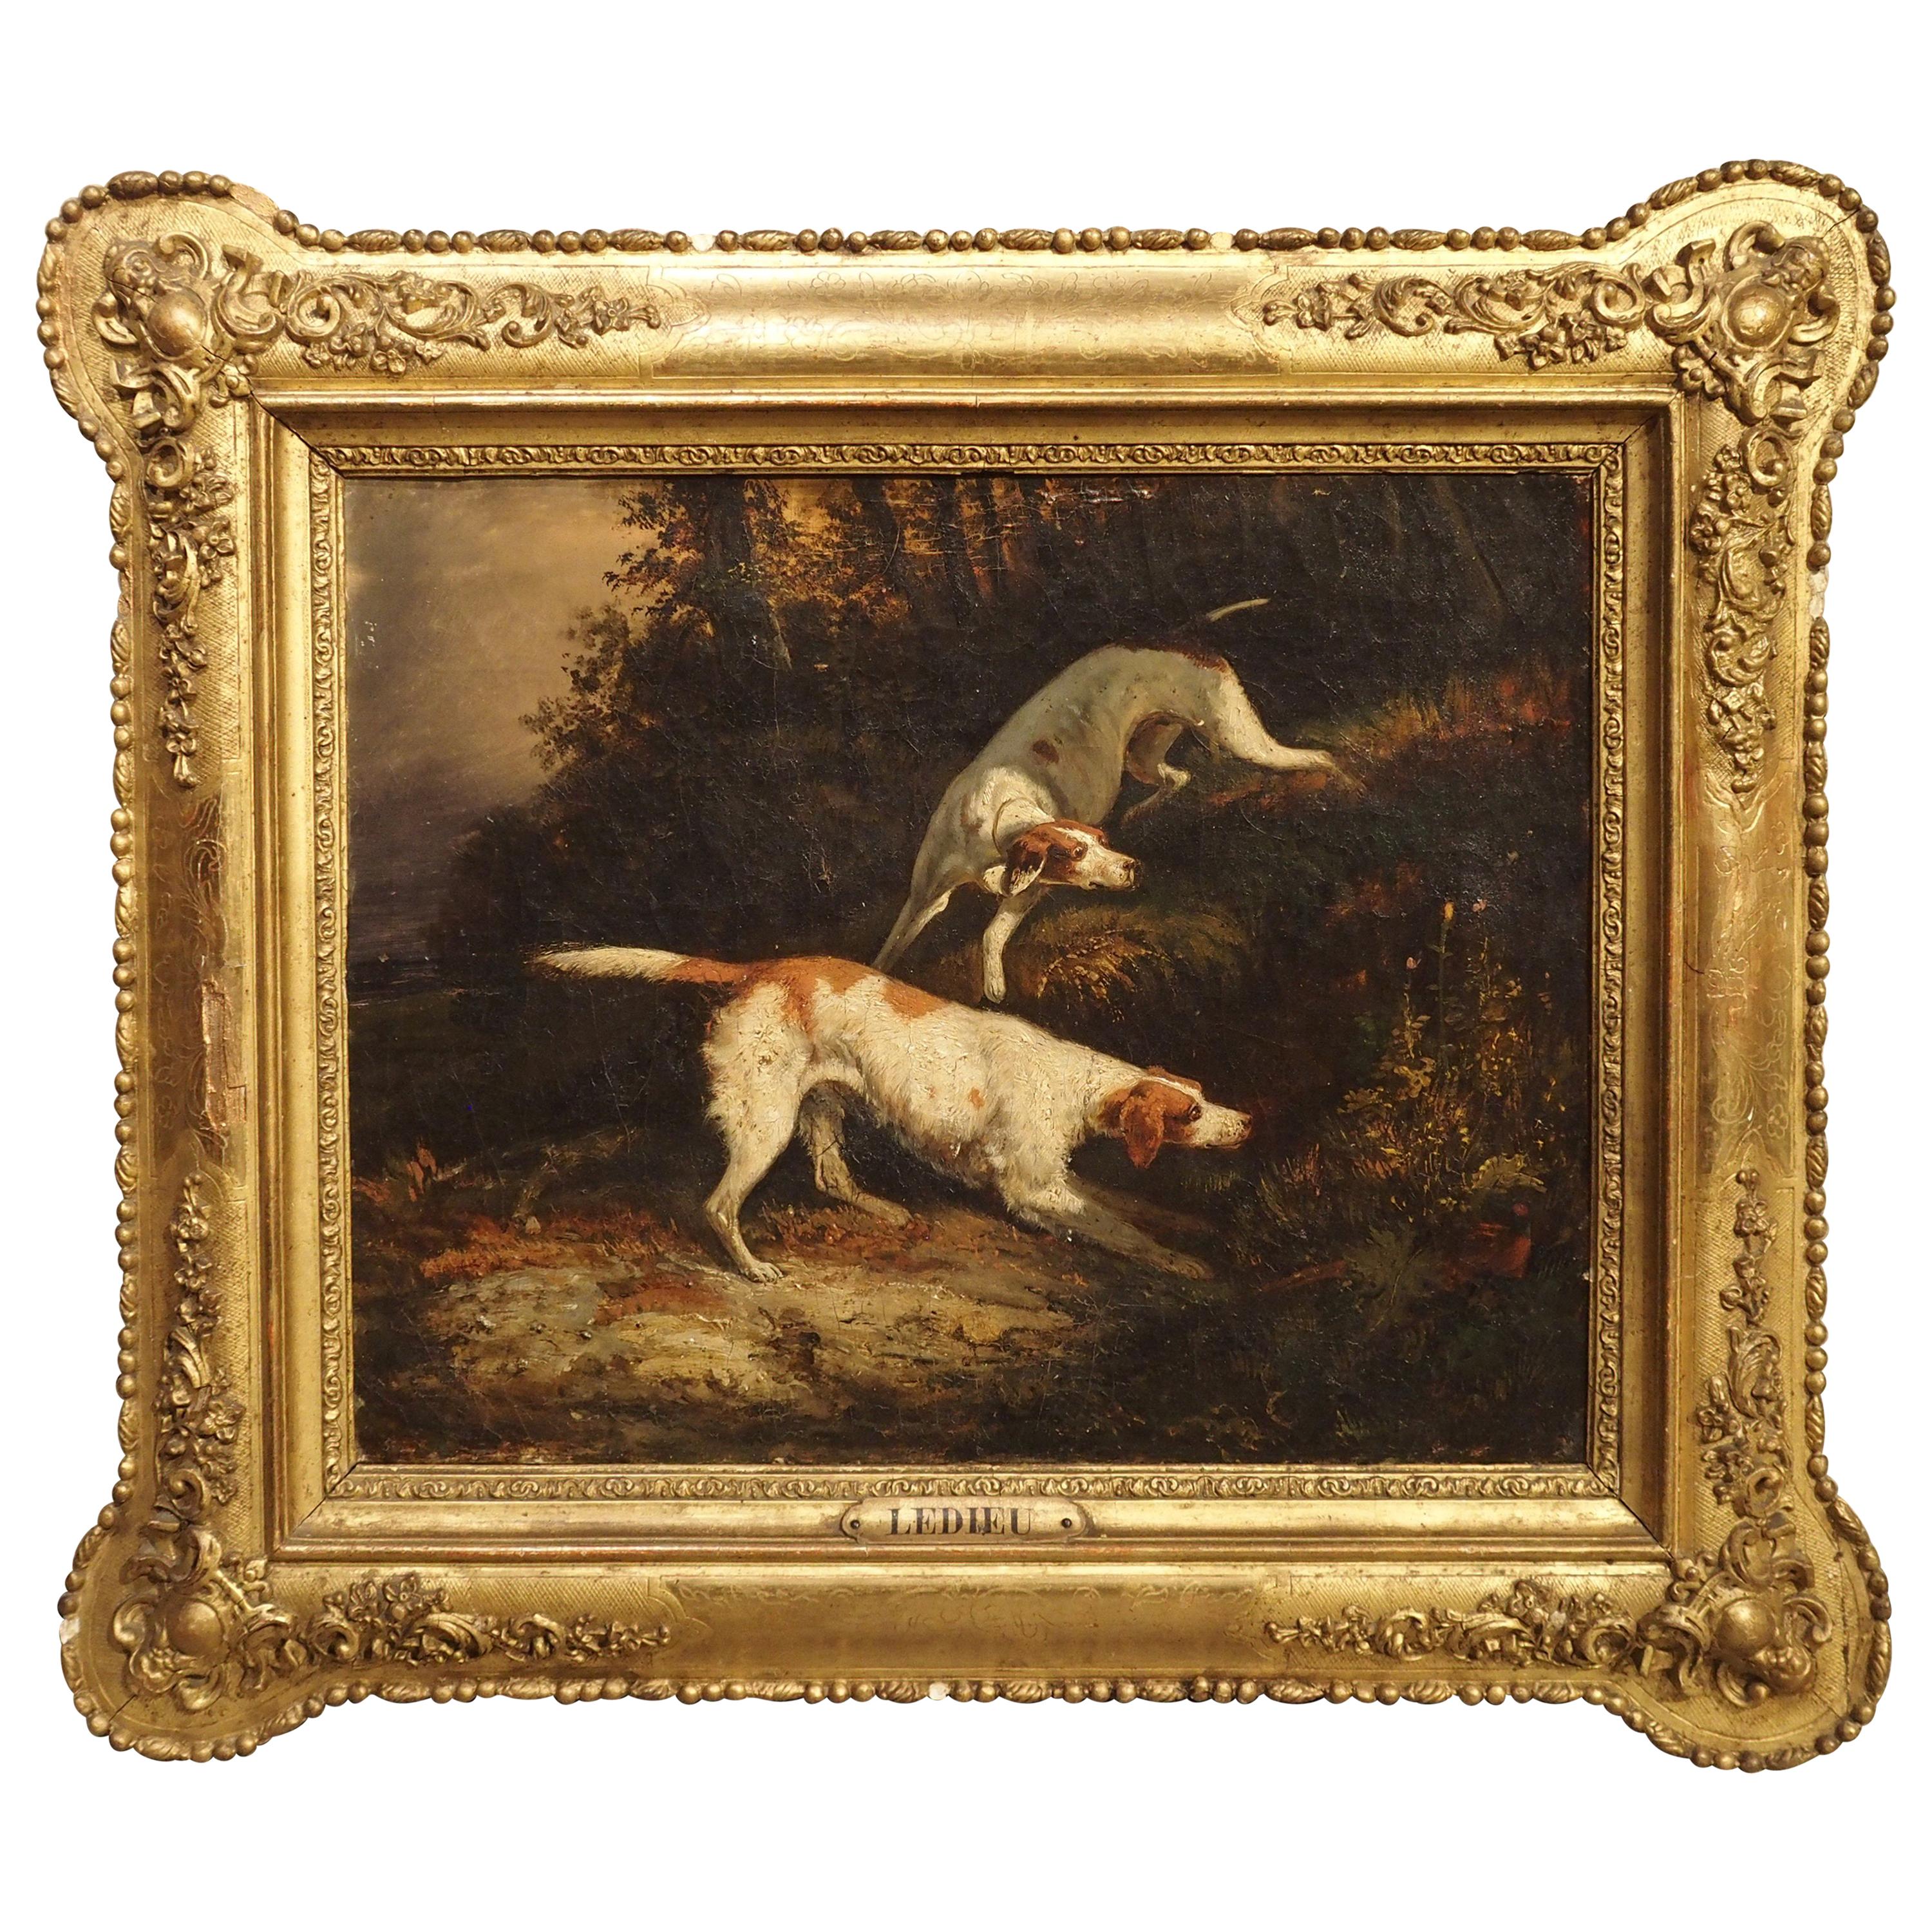 https://a.1stdibscdn.com/antique-french-hunting-dogs-painting-19th-century-for-sale/1121189/f_160207821567778726891/16020782_master.jpg